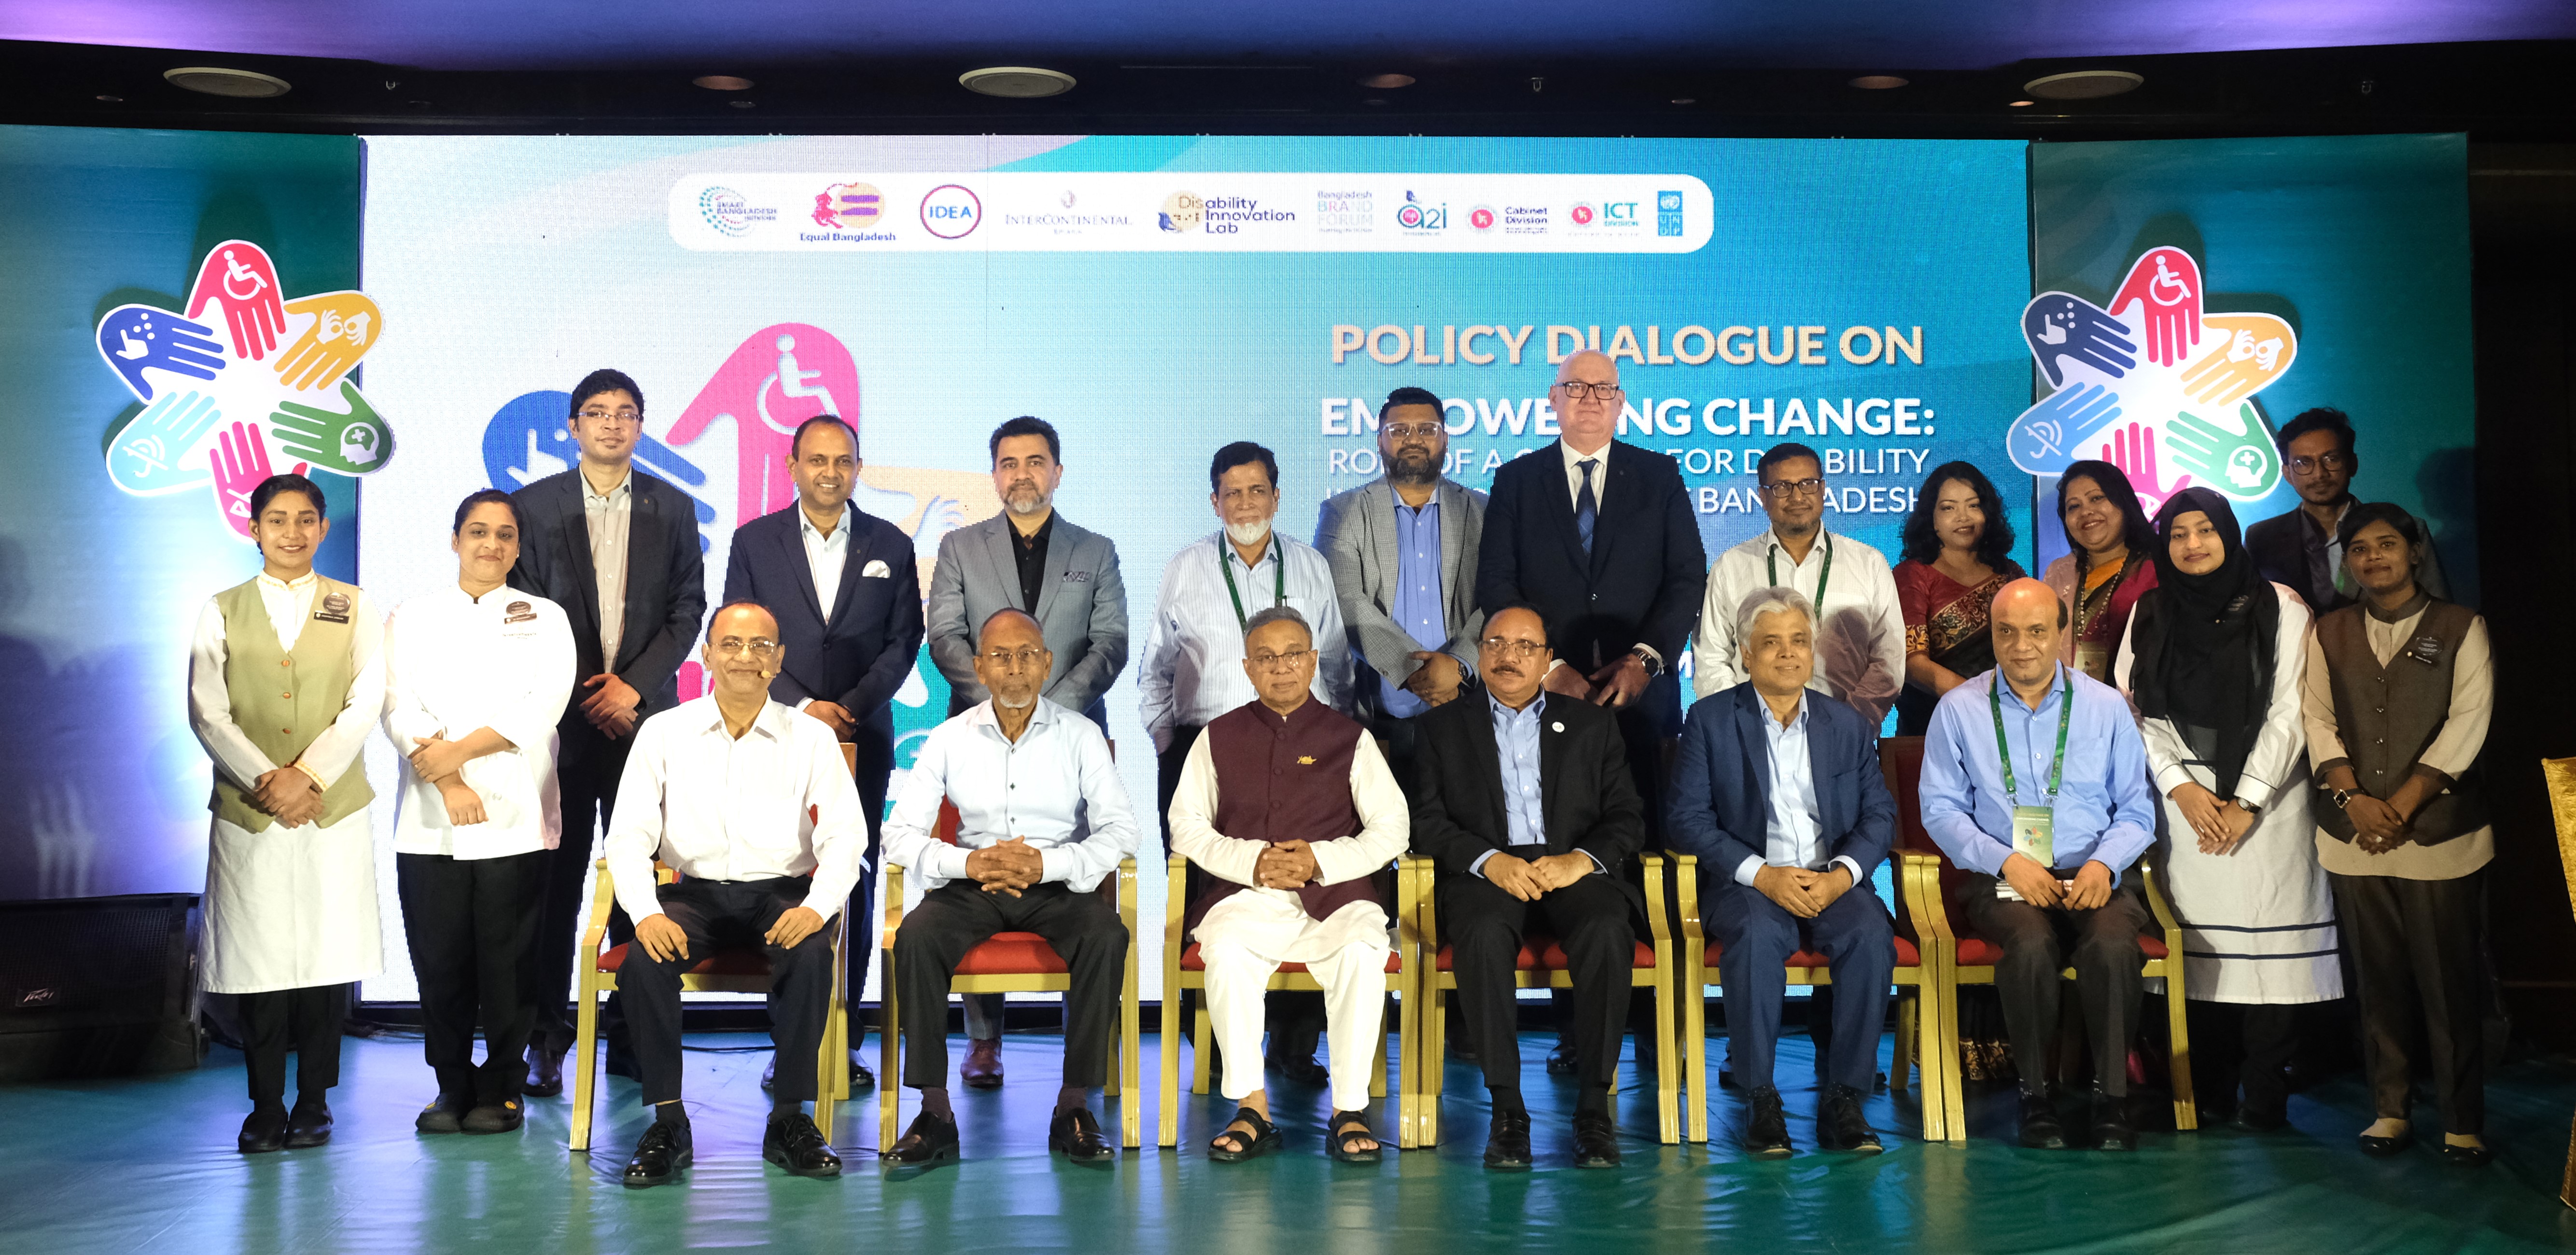 Empowering Change: Policy Dialogue on disability inclusion in SMART Bangladesh held in city